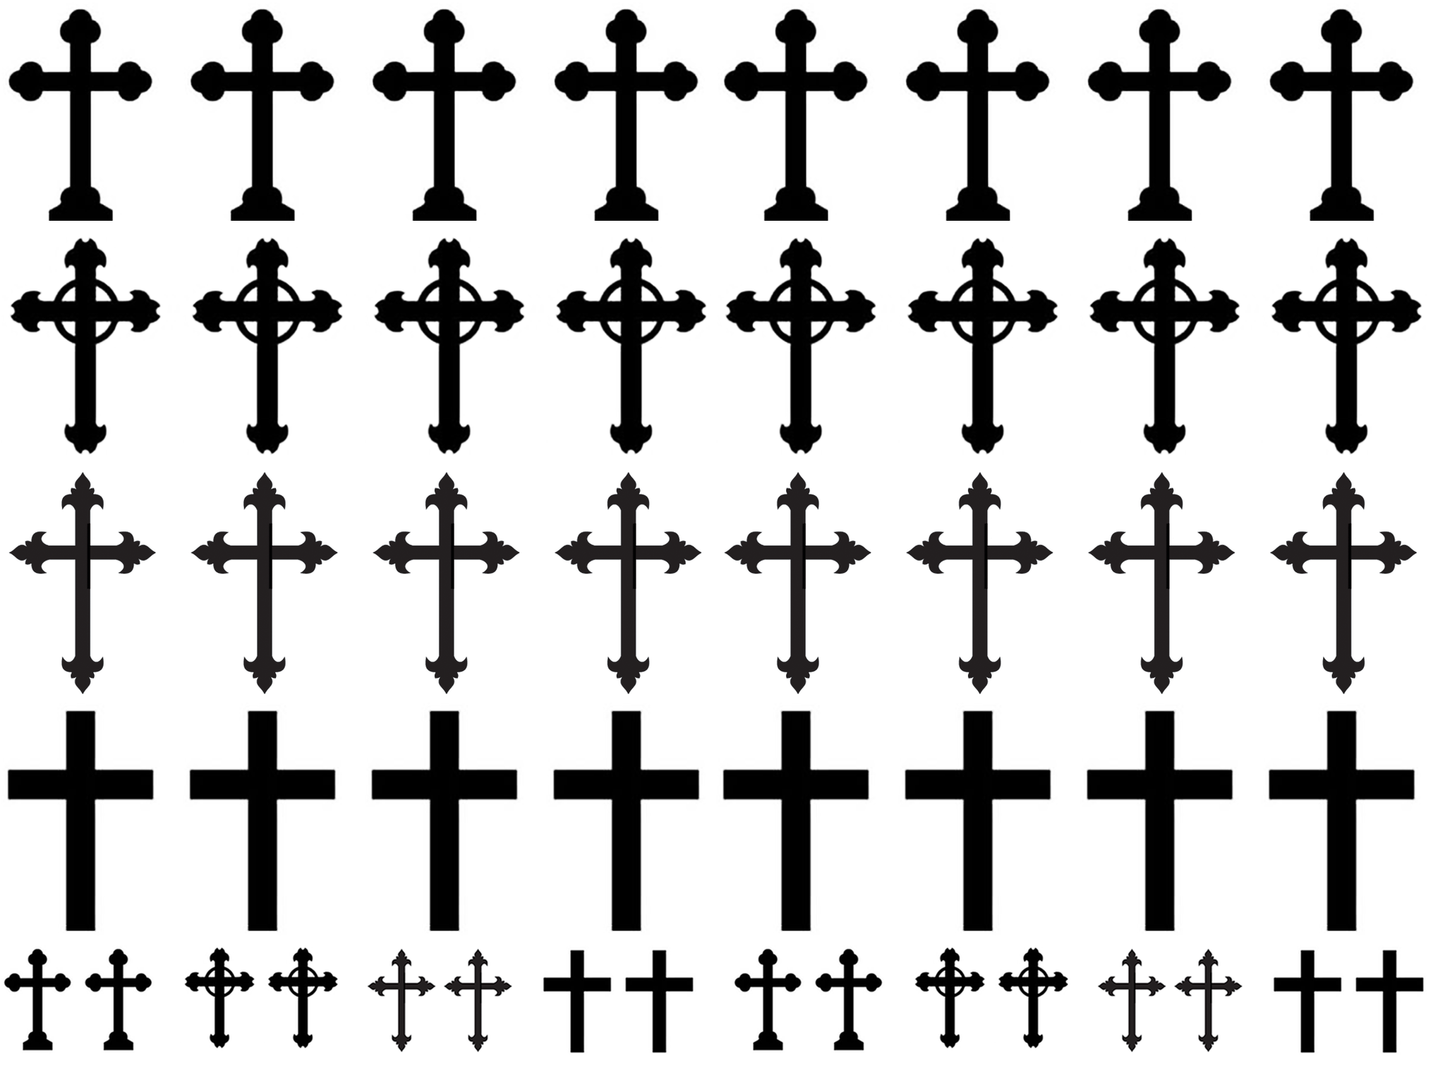 Crosses 48 pcs 1/2" to 1-1/16" Black Fused Glass Decals